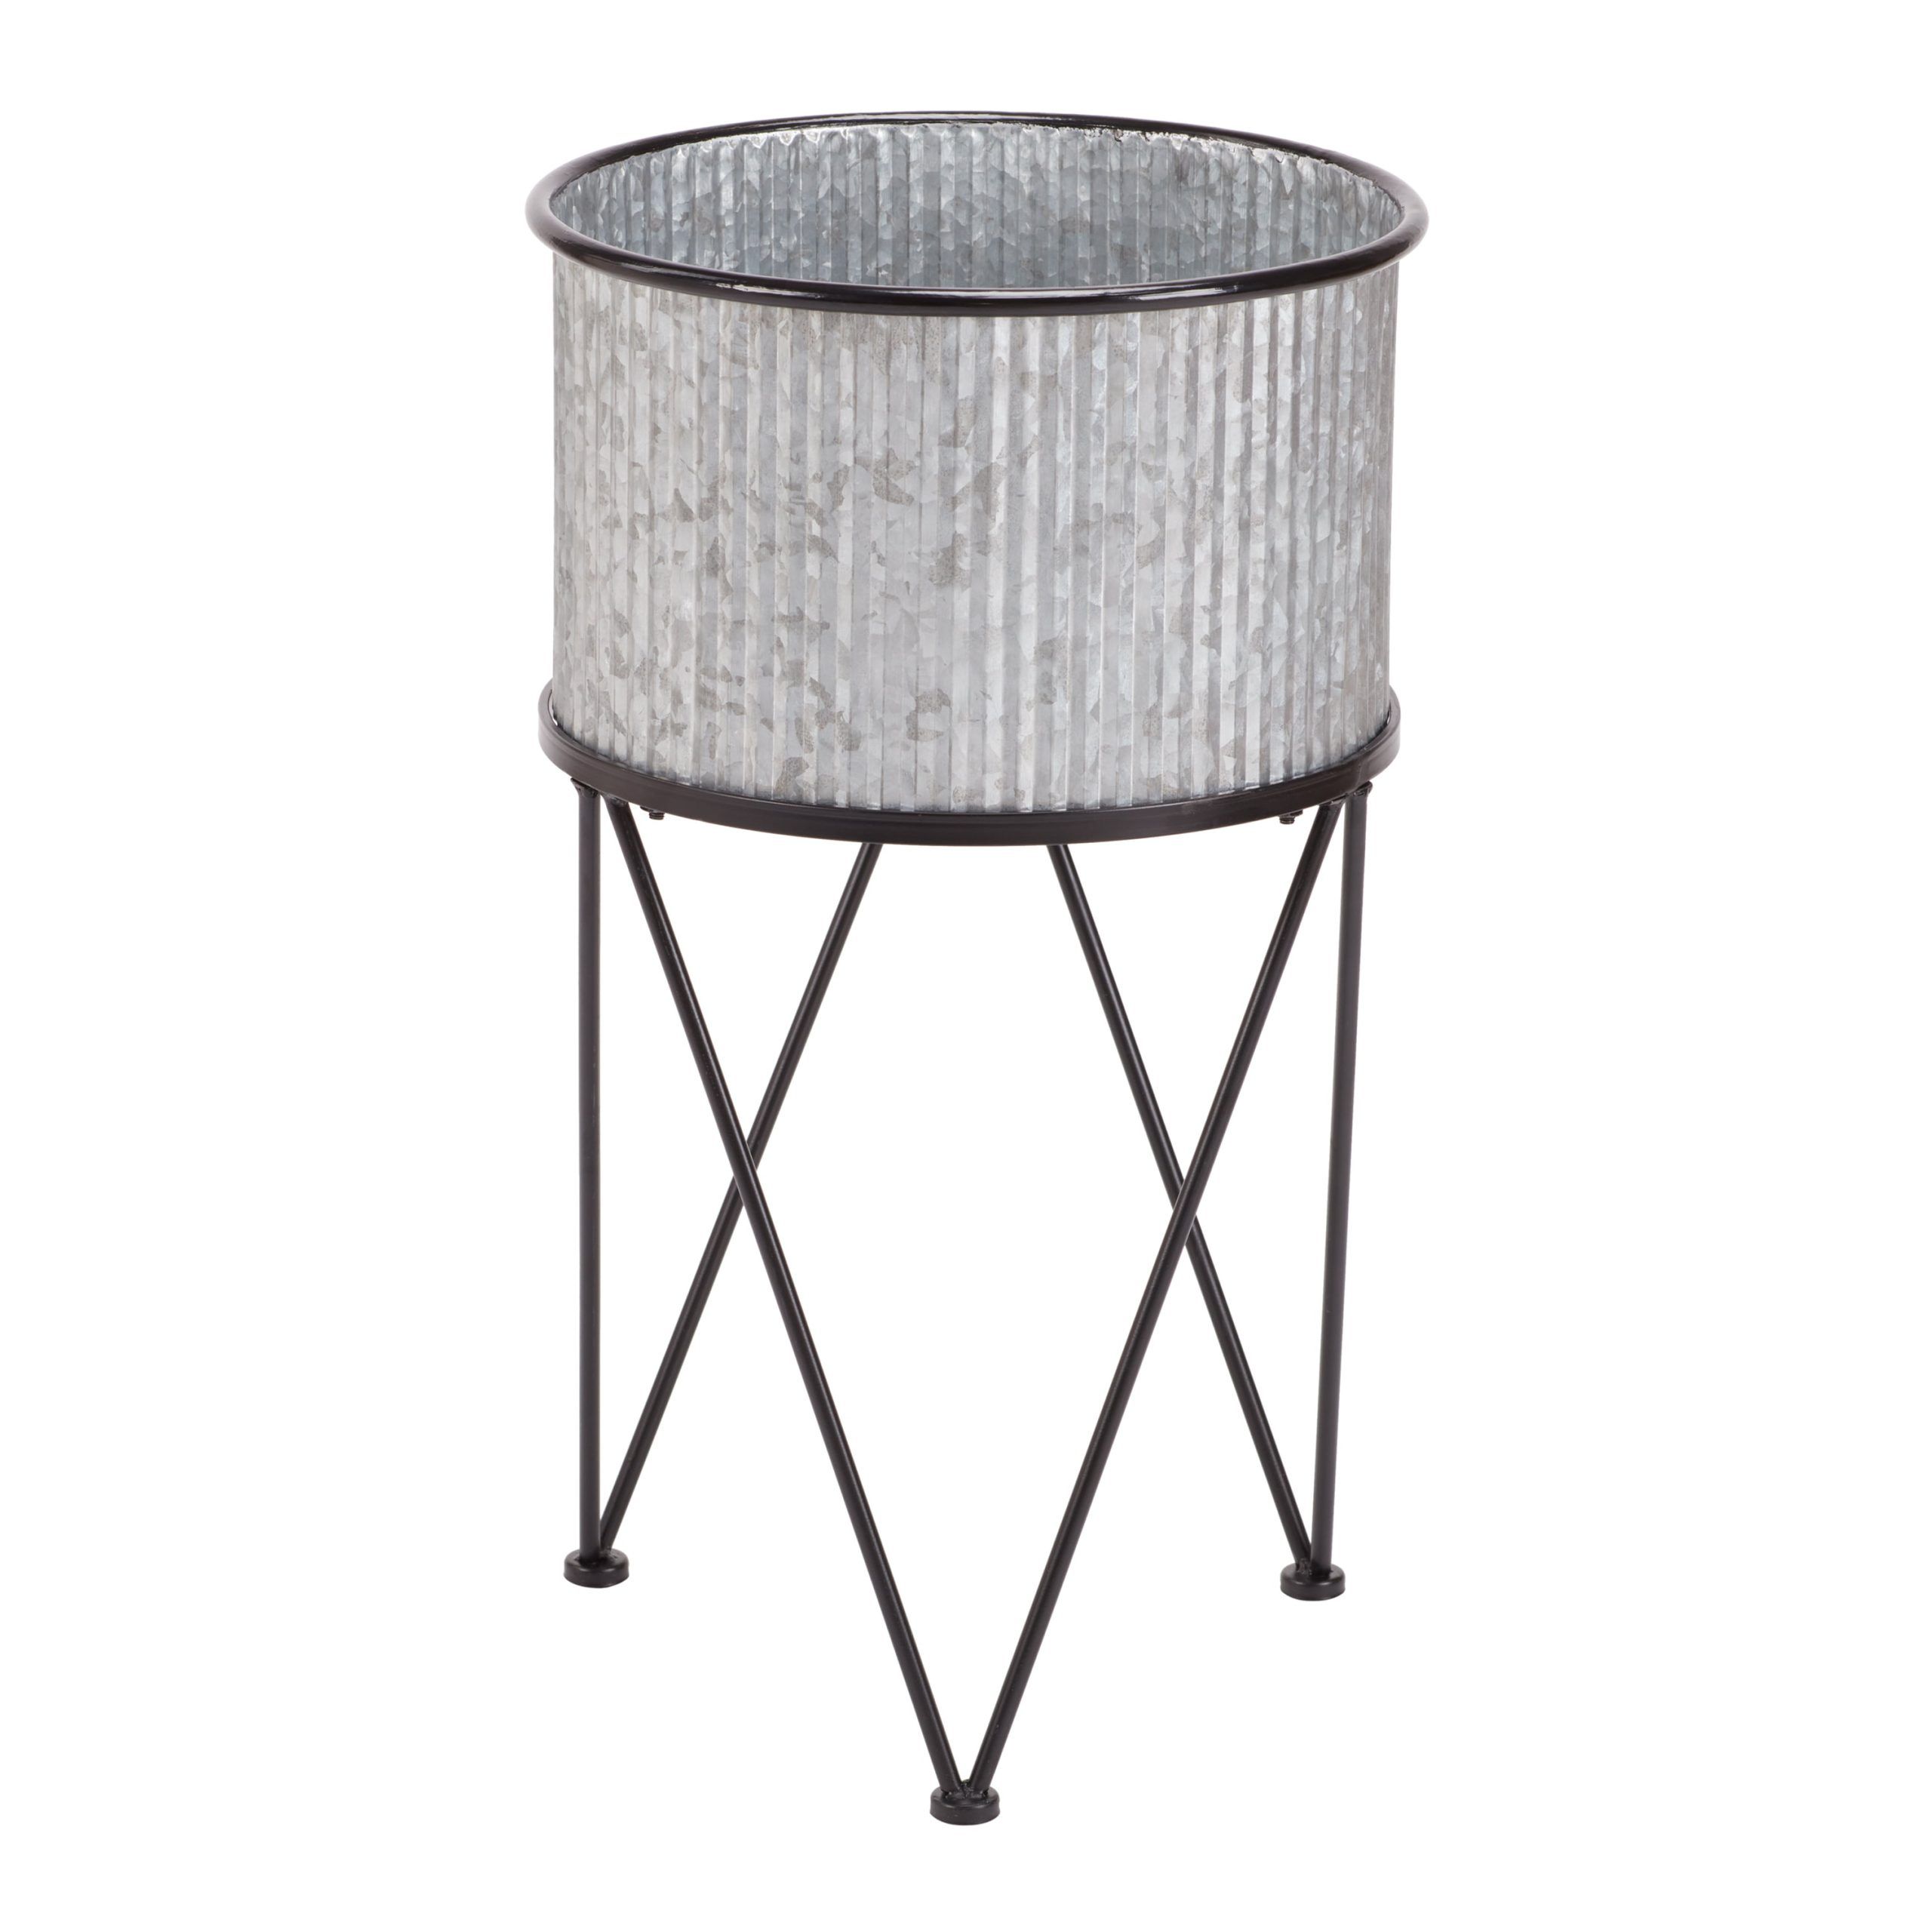 Popular Galvanized Plant Stands In Mainstays Karvel Galvanized Metal Column Planter With Stand, 15.7 In Dia (View 1 of 10)